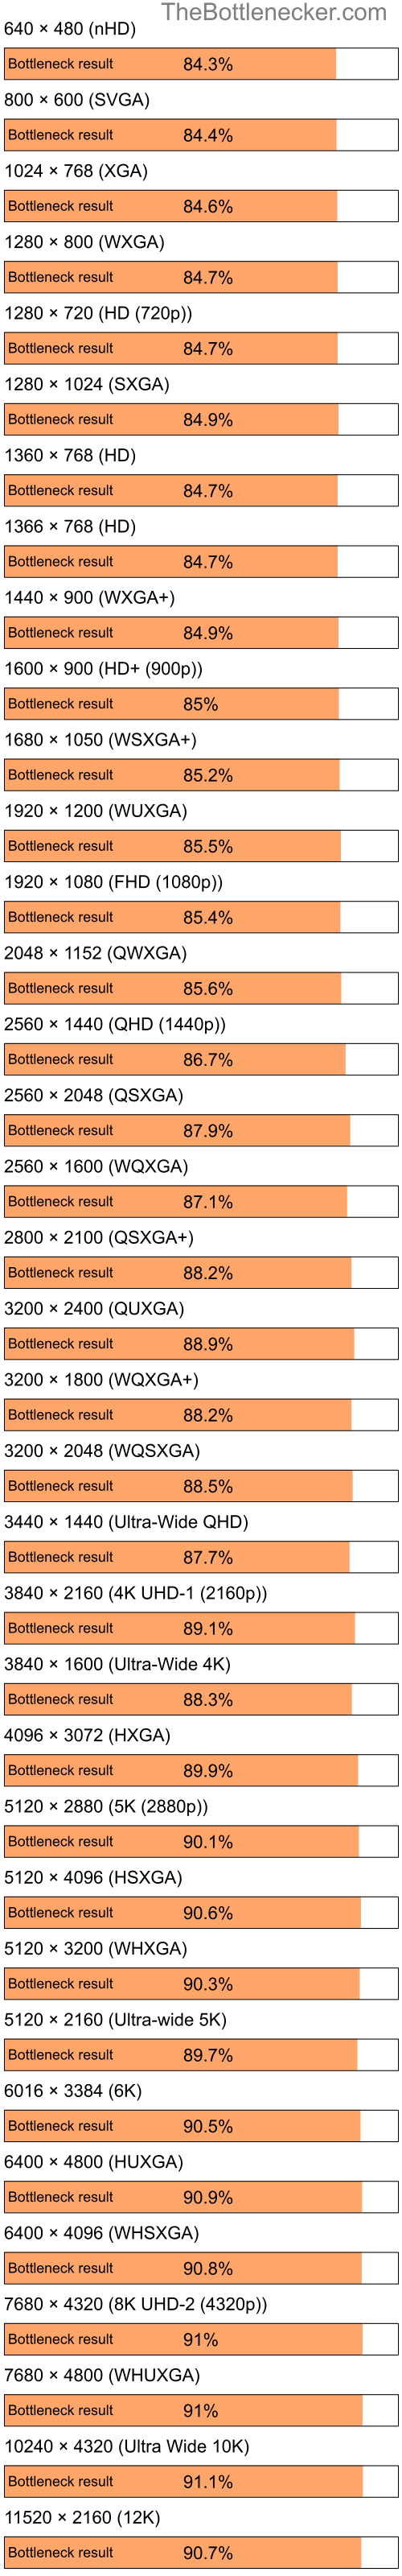 Bottleneck results by resolution for Intel Pentium 4 and NVIDIA GeForce 7000M in General Tasks